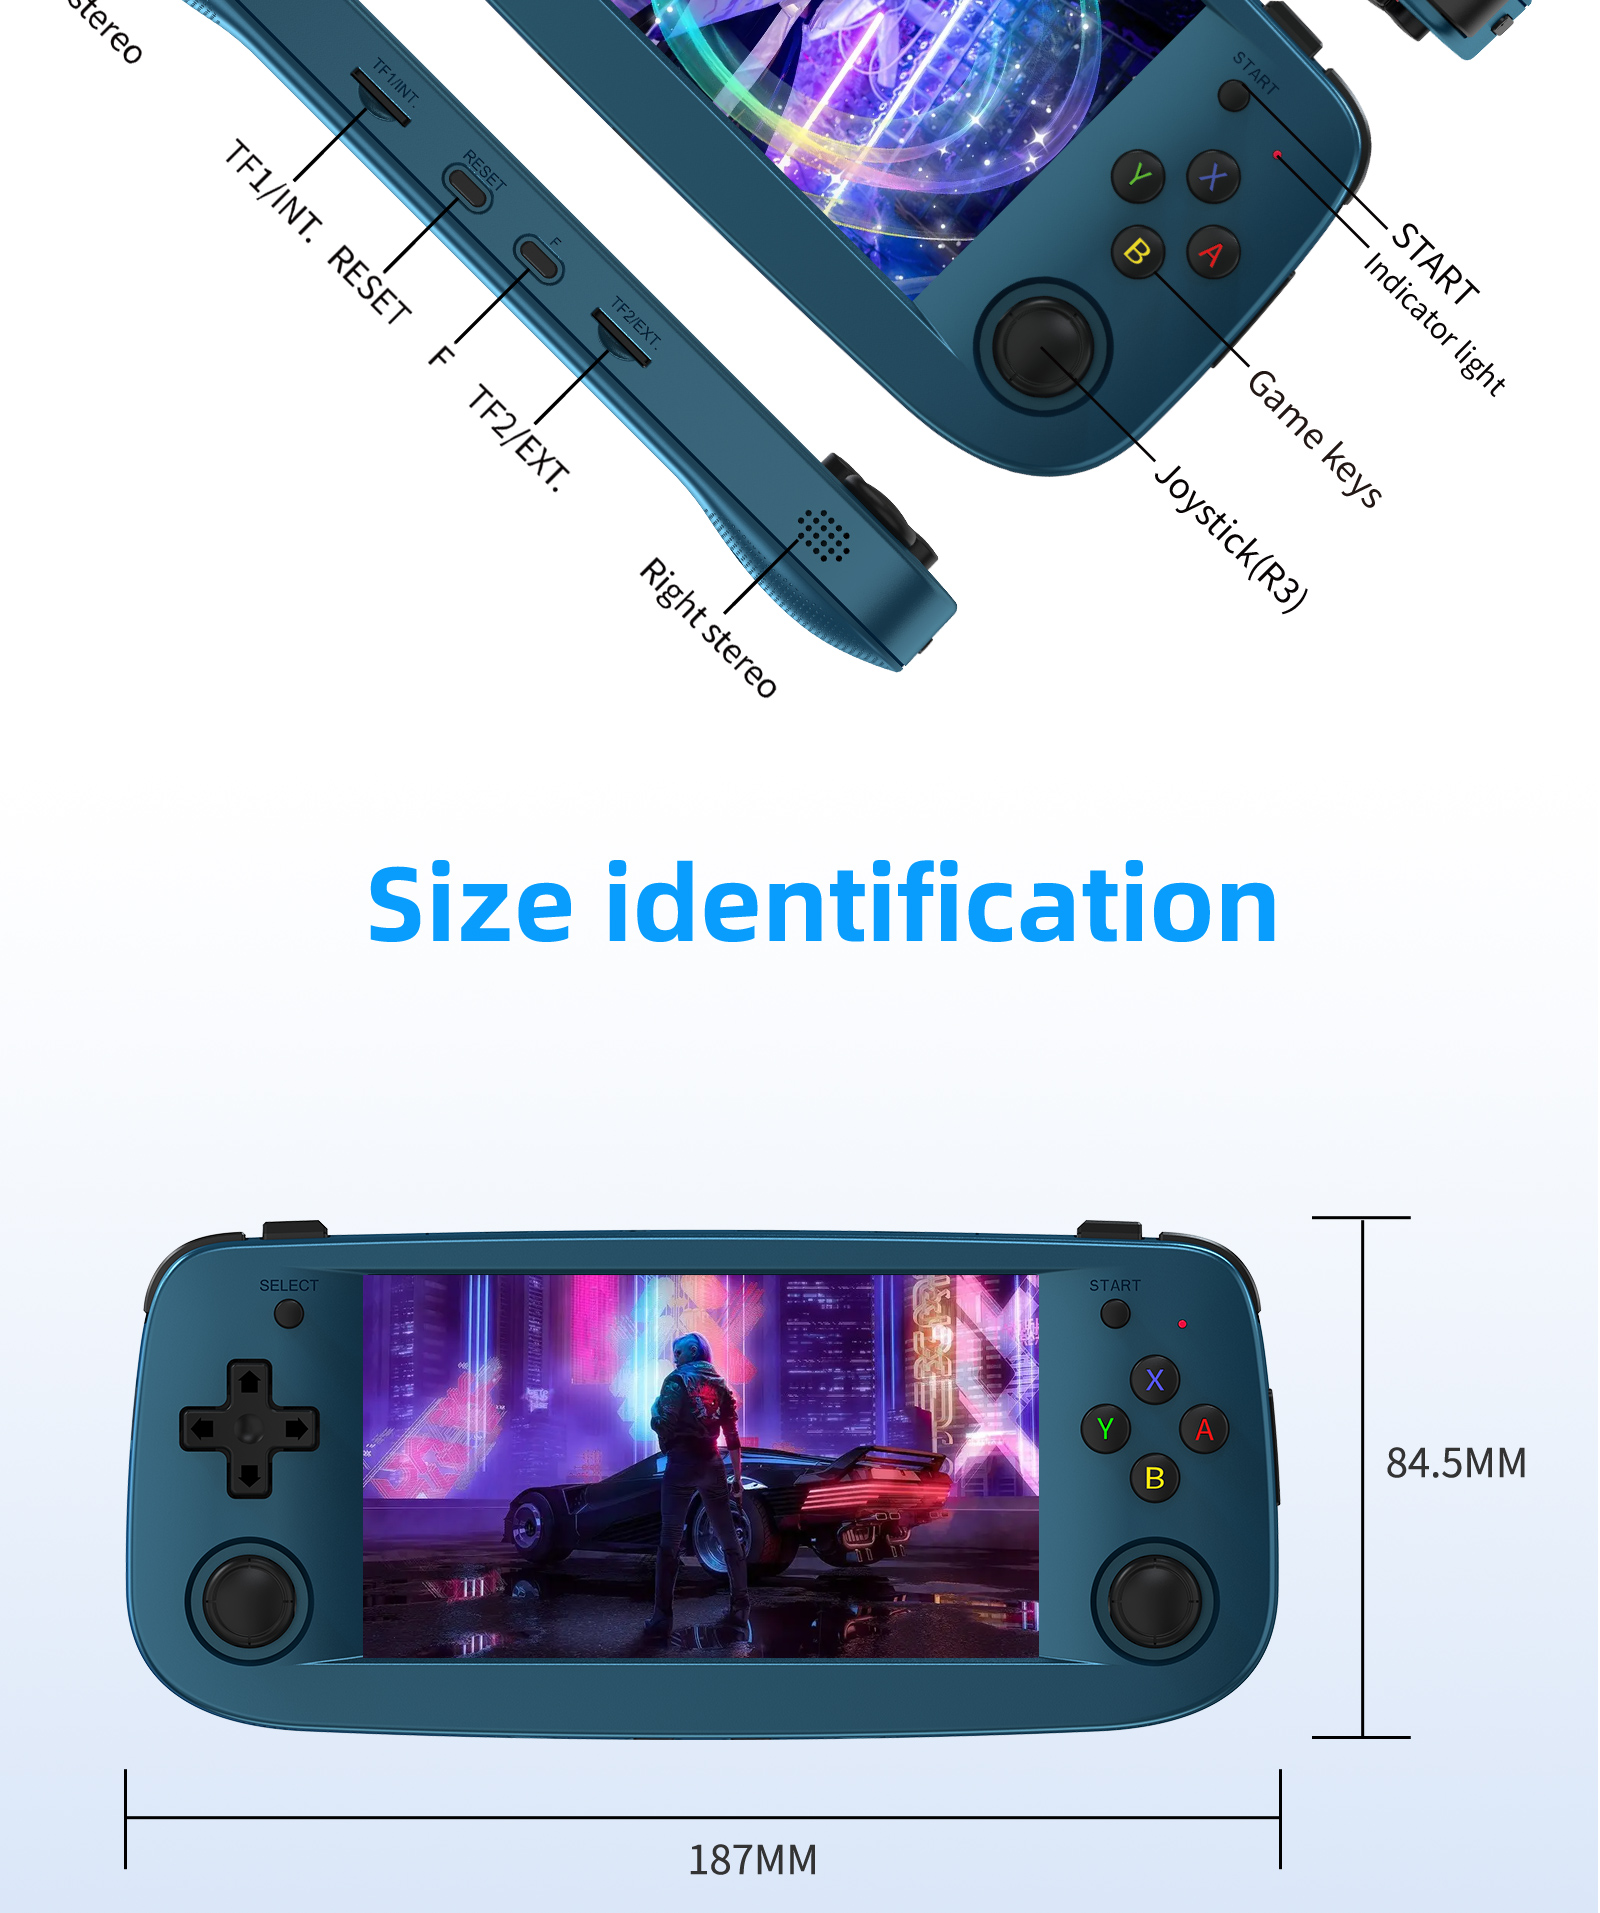 ANBERNIC RG503 RK3566 64 Bit 1.8GHz 80GB 20000 Games Handheld Game Console 4.95 inch OLED Screen for PSP DC PCE N64 5G WiFi MoonLight Sreaming Support bluetooth 4.2 Gamepad TV Output Linux System Video Game Player